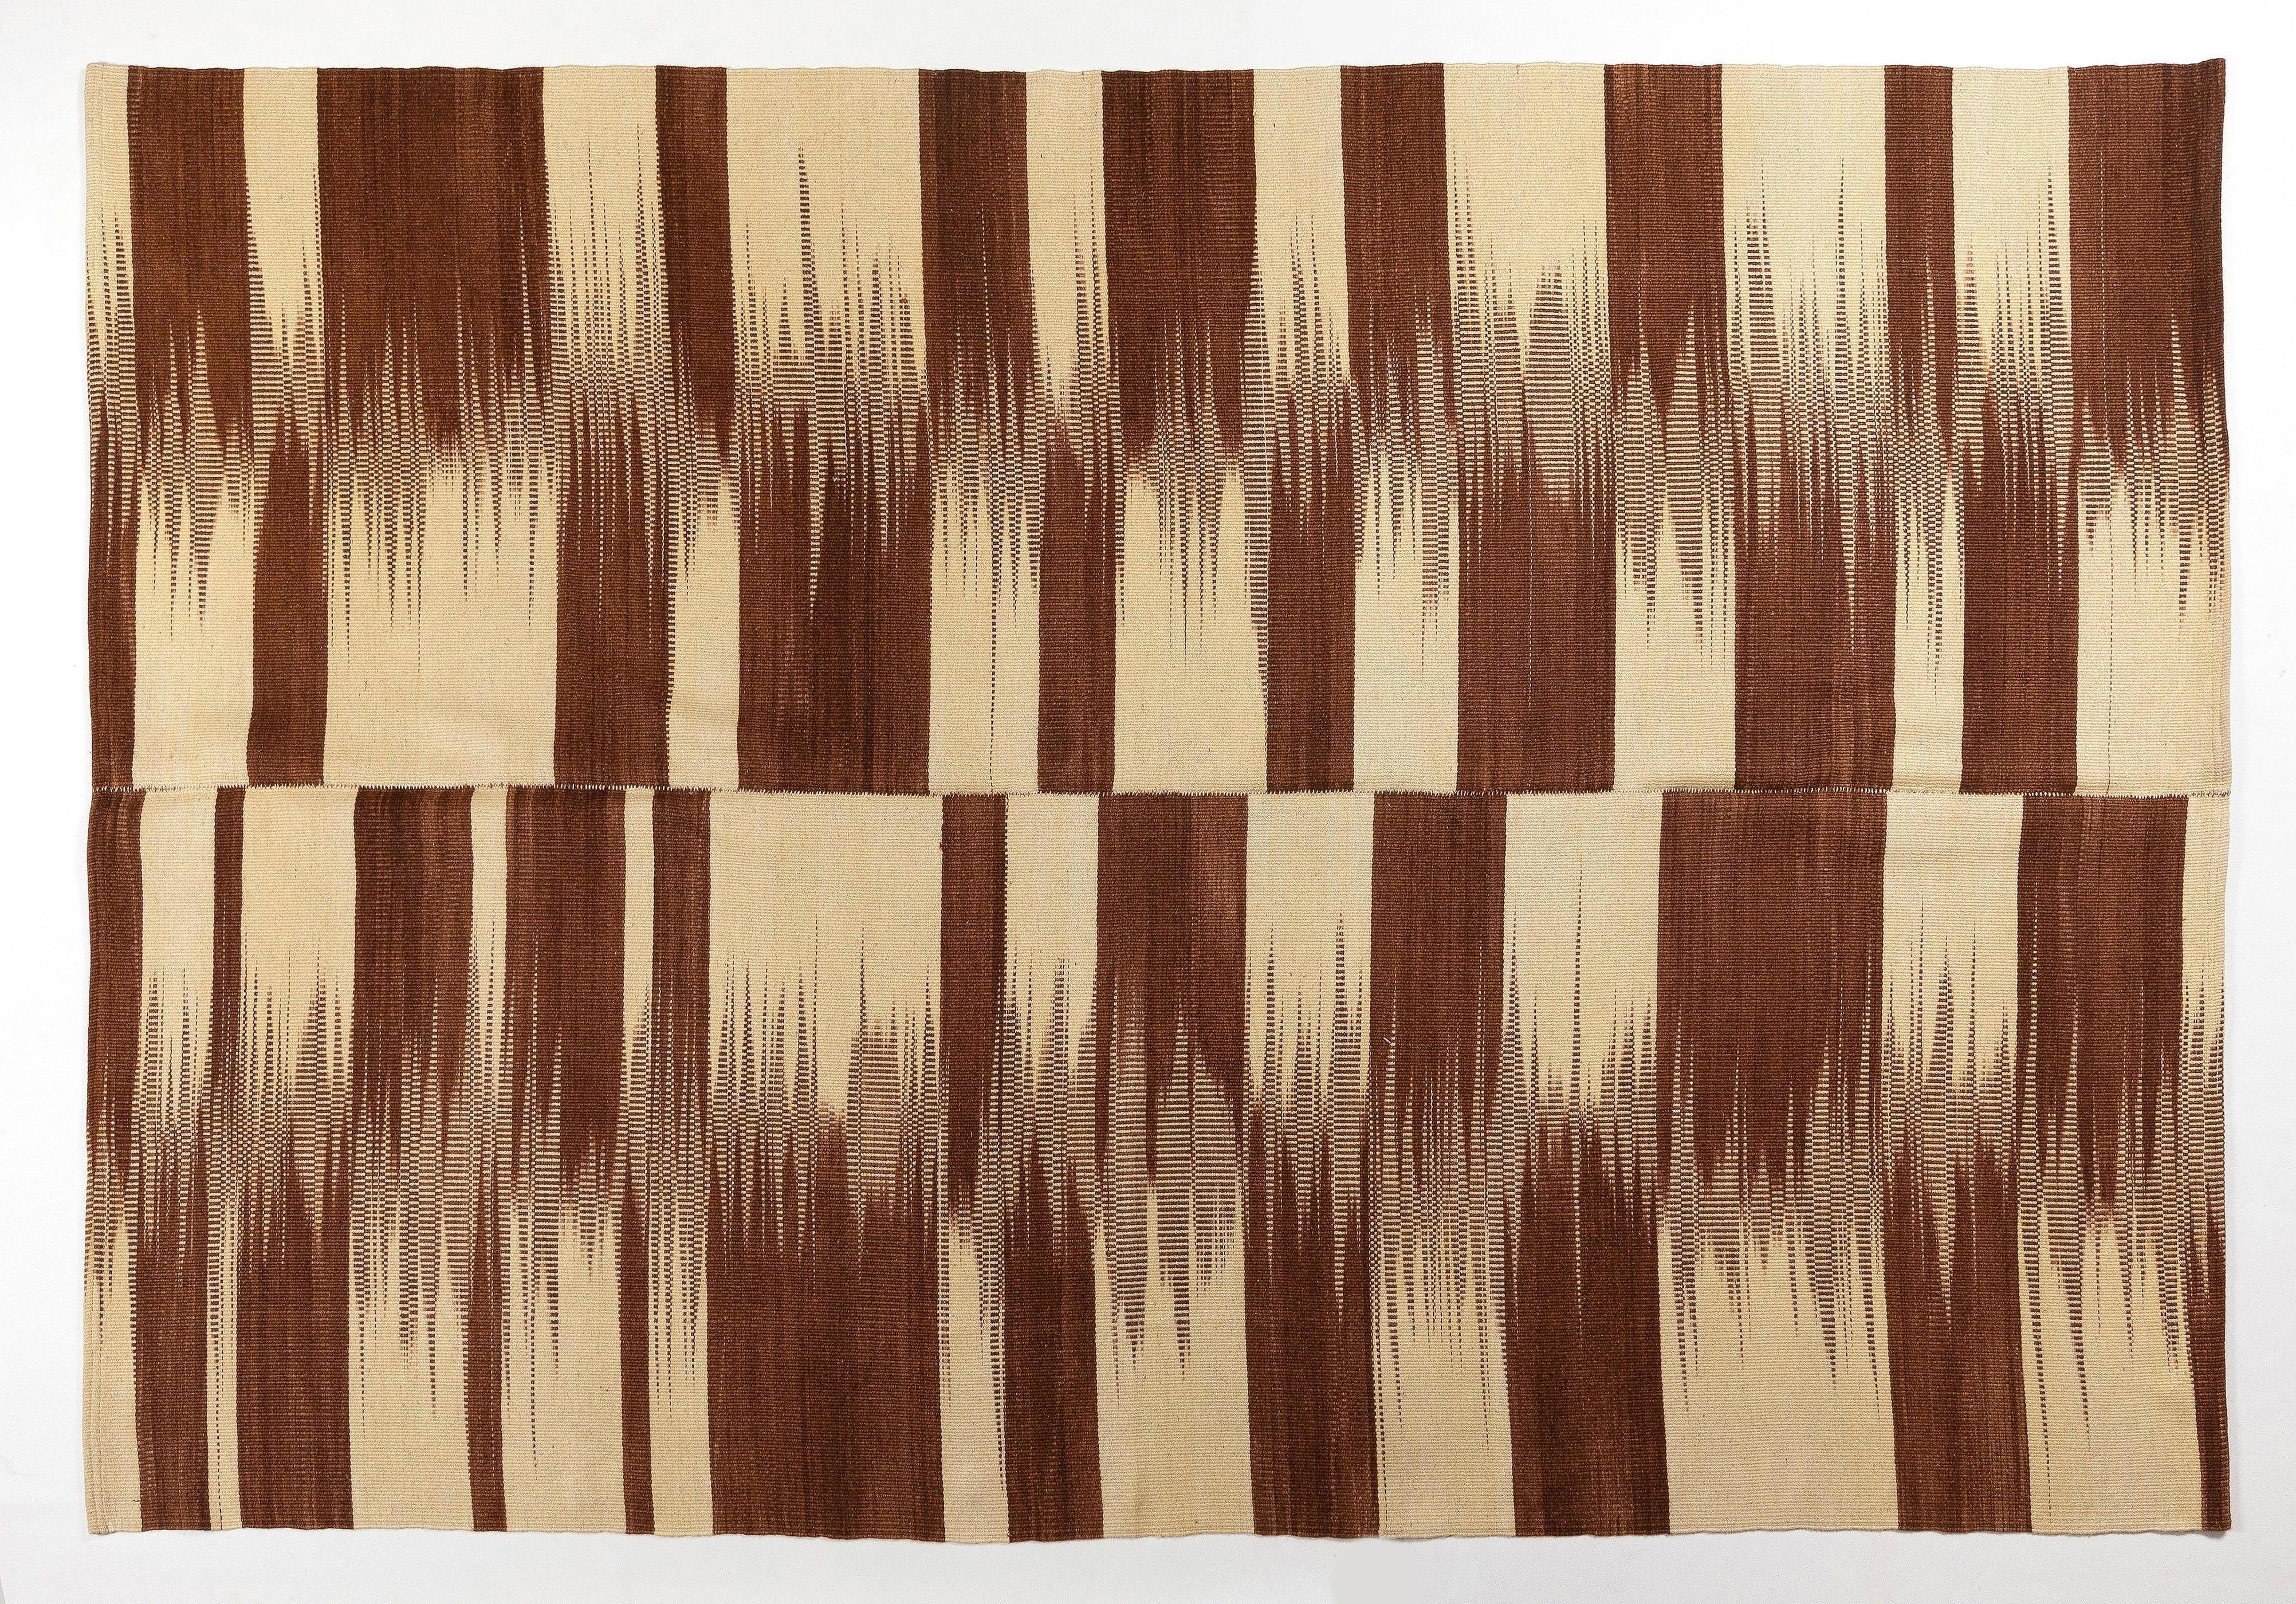 A modern flat-weave rug with minimal design. Handwoven by female artisans in a rural village workshop in Eastern Turkey under the supervision and with the support of Ministry of Education and Ministry of Culture and Tourism of Turkey.
Wool wefts on